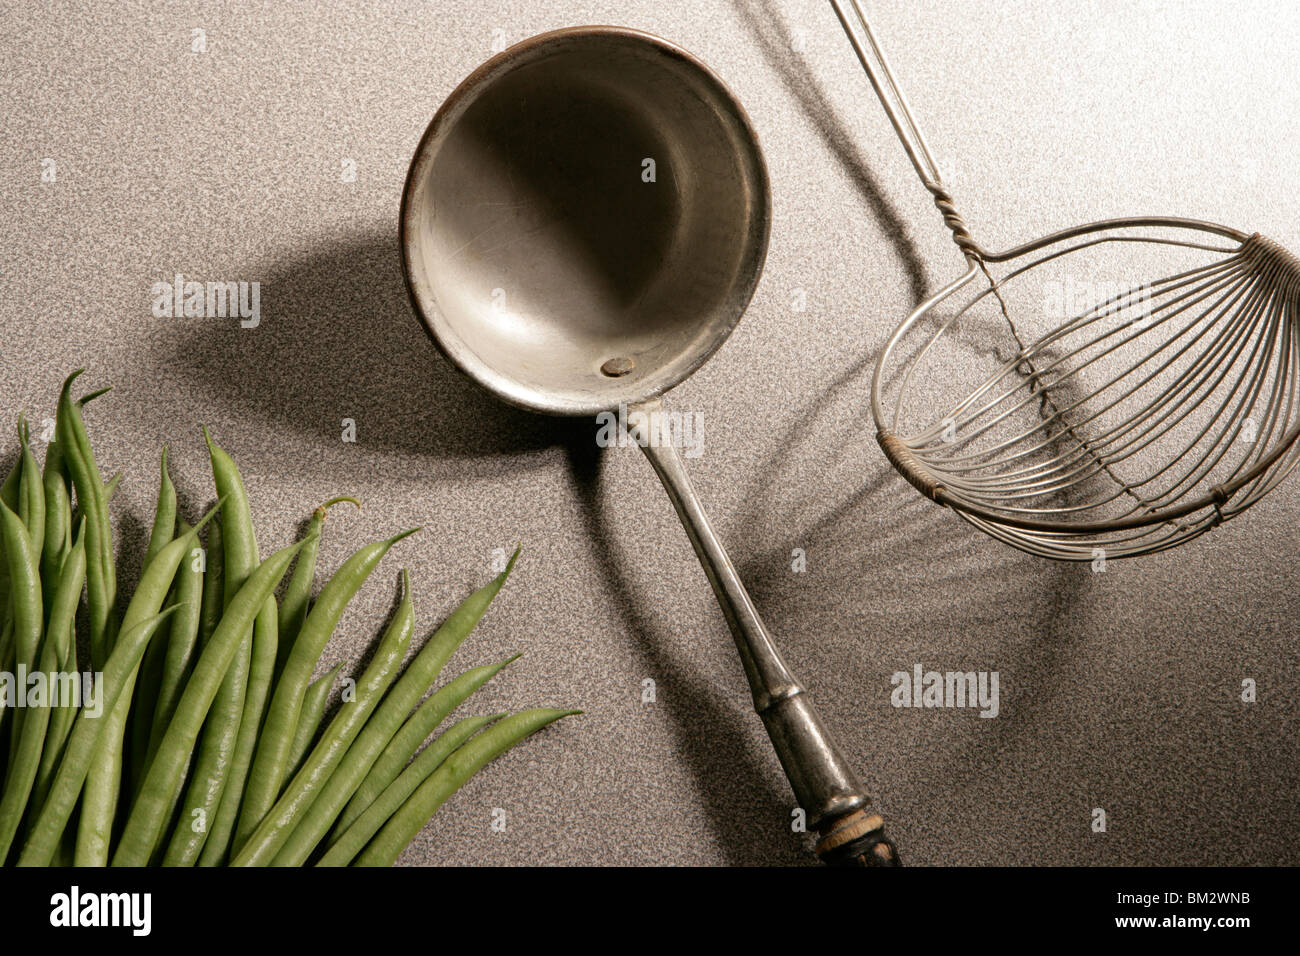 Old kitchen utensils with fresh green beans Stock Photo